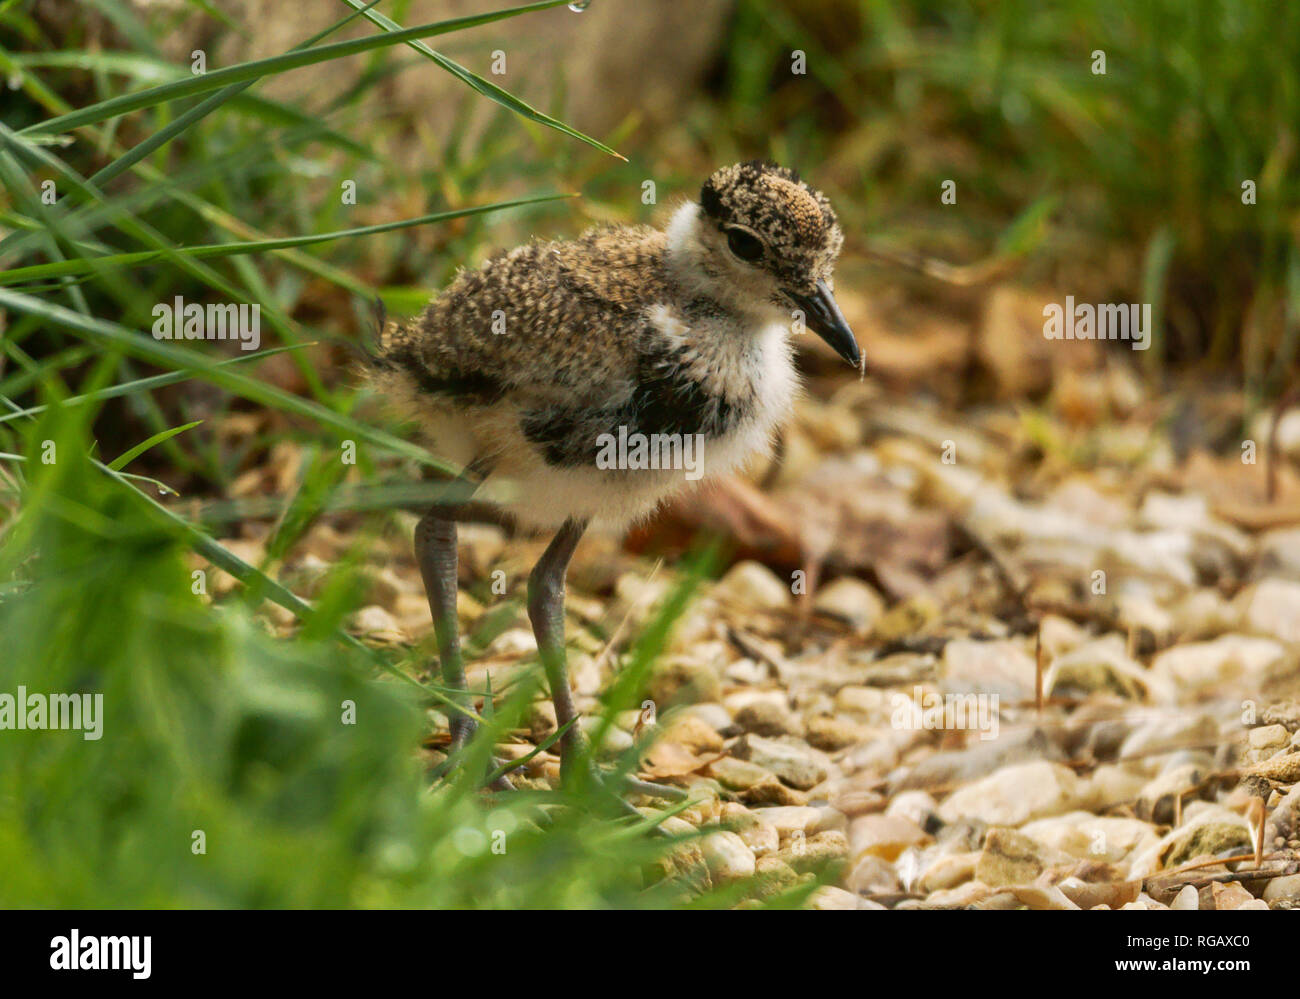 Spur-winged Plover  (Hoplopterus spinosus).Juvenile at 15 days old. Stock Photo